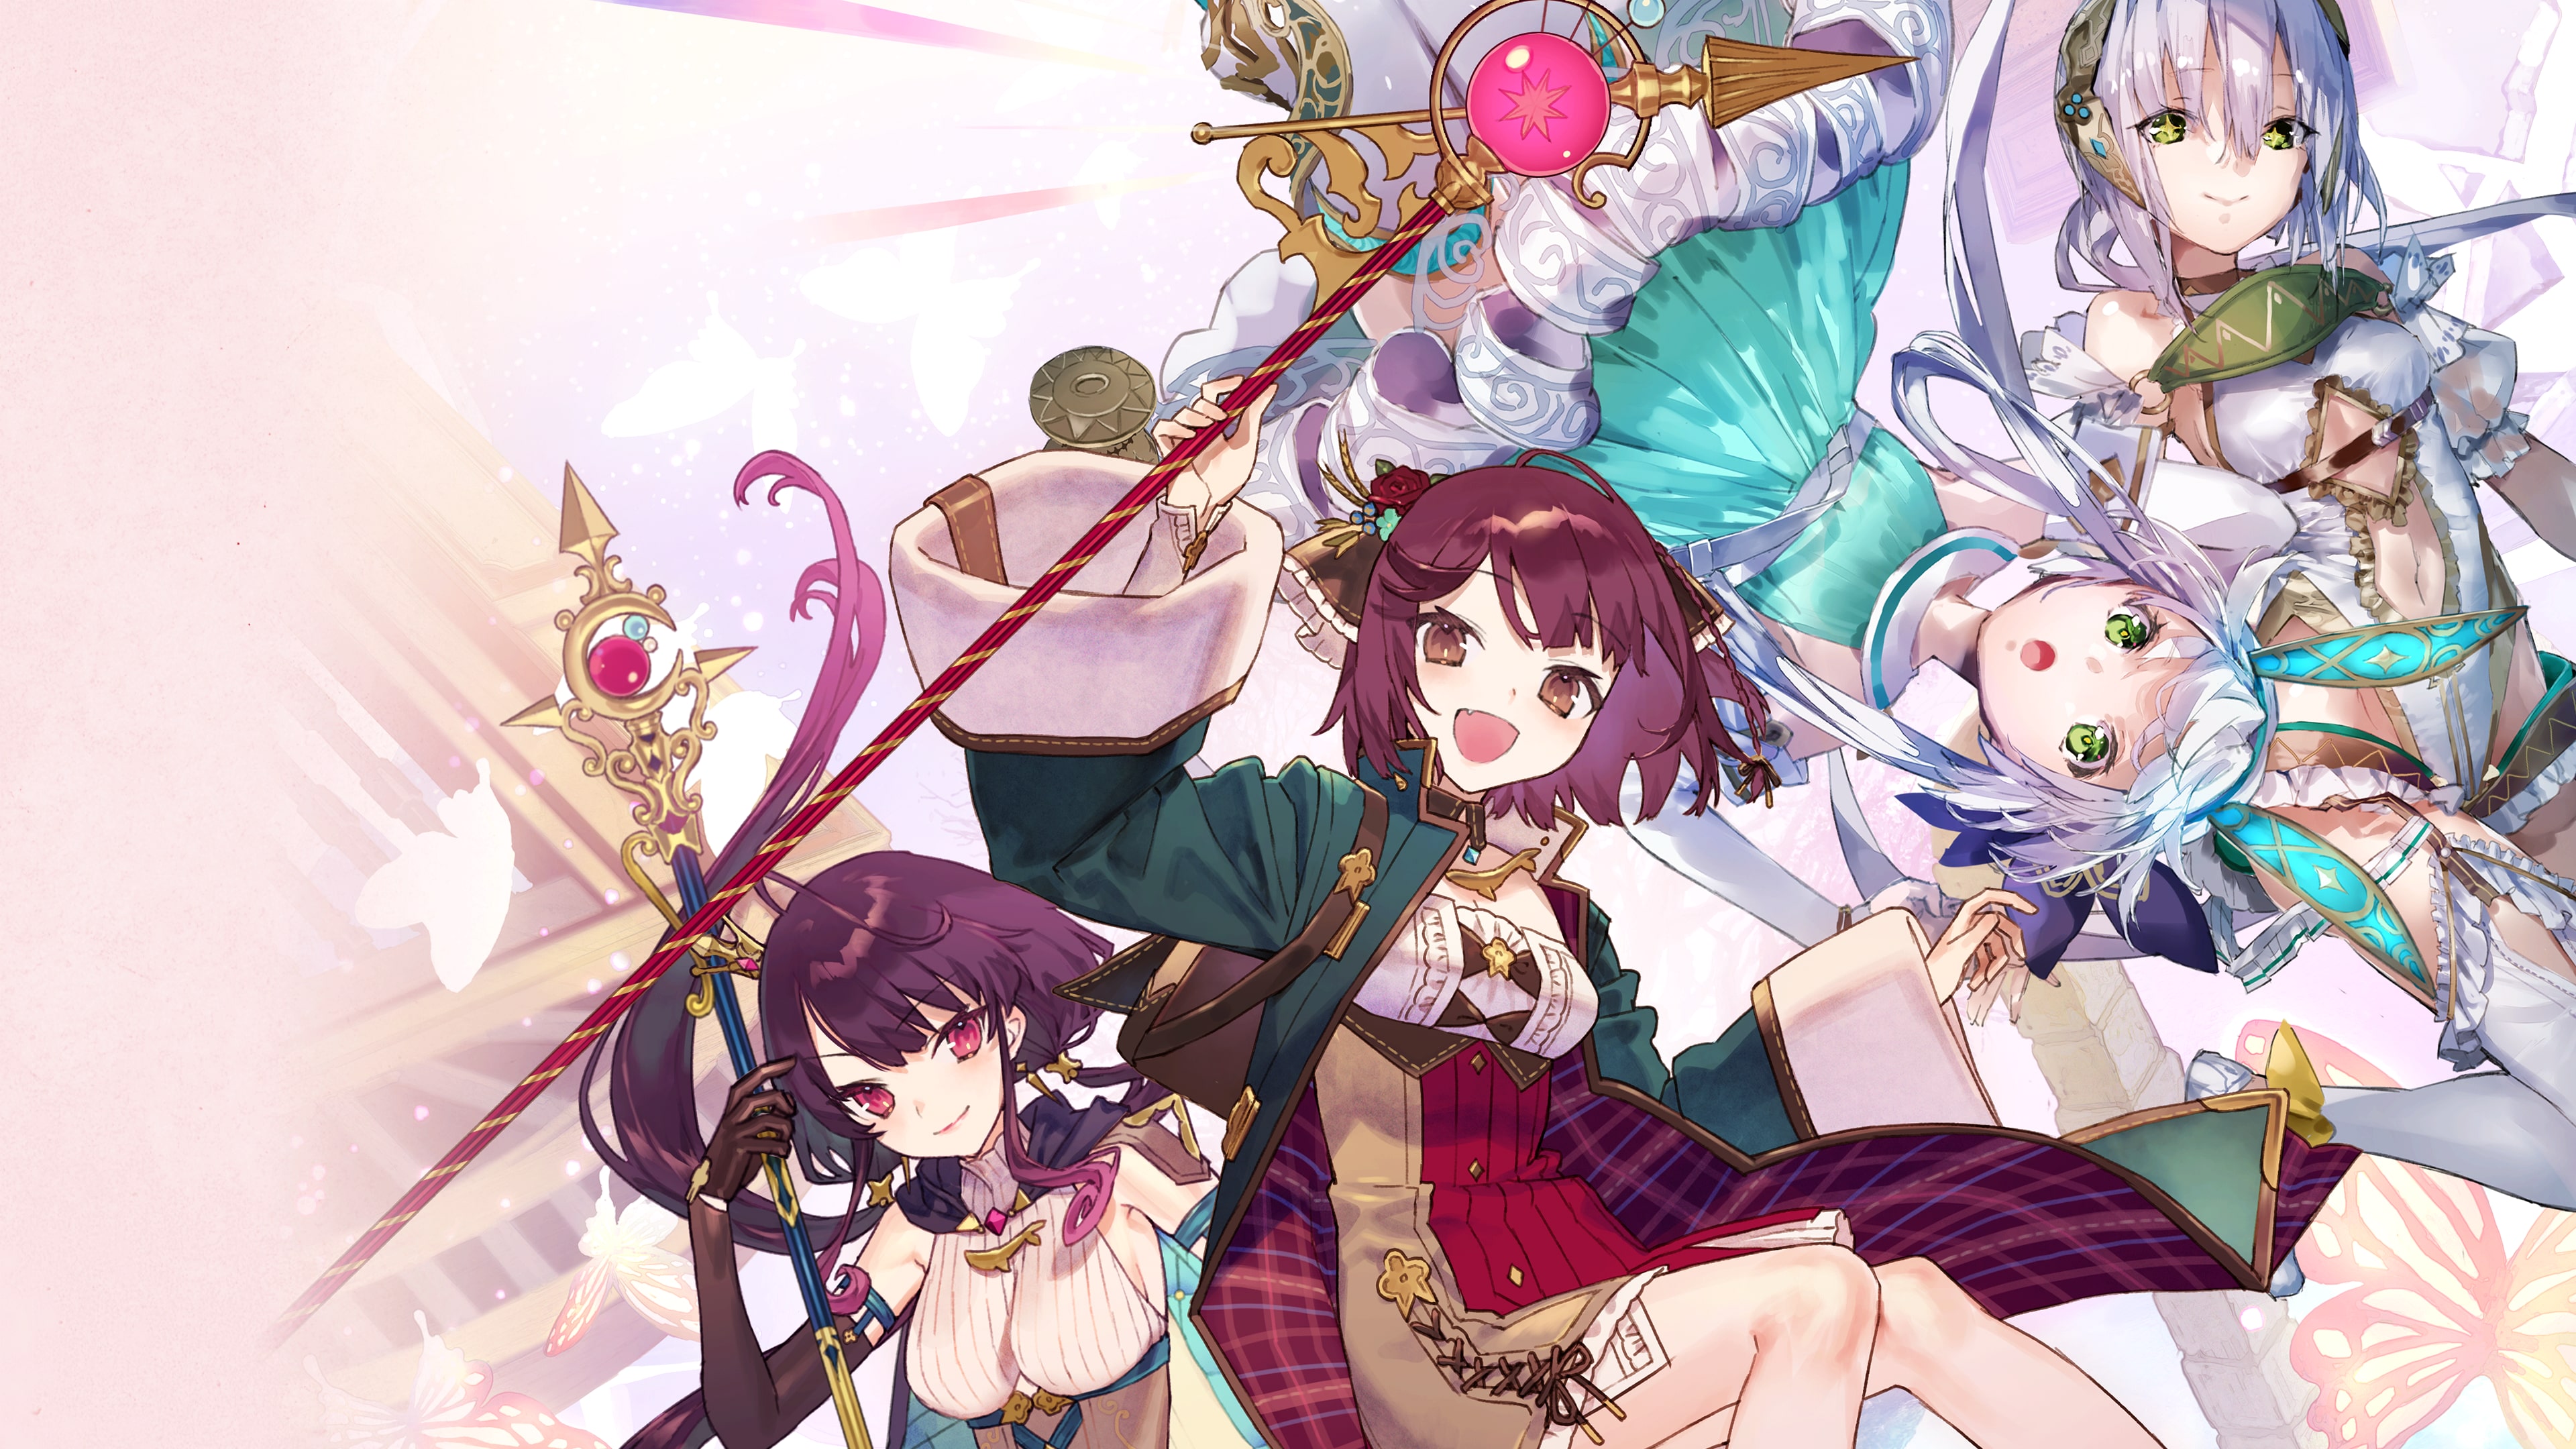 Atelier Sophie 2: The Alchemist of the Mysterious Dream (Simplified Chinese, Korean, Traditional Chinese)